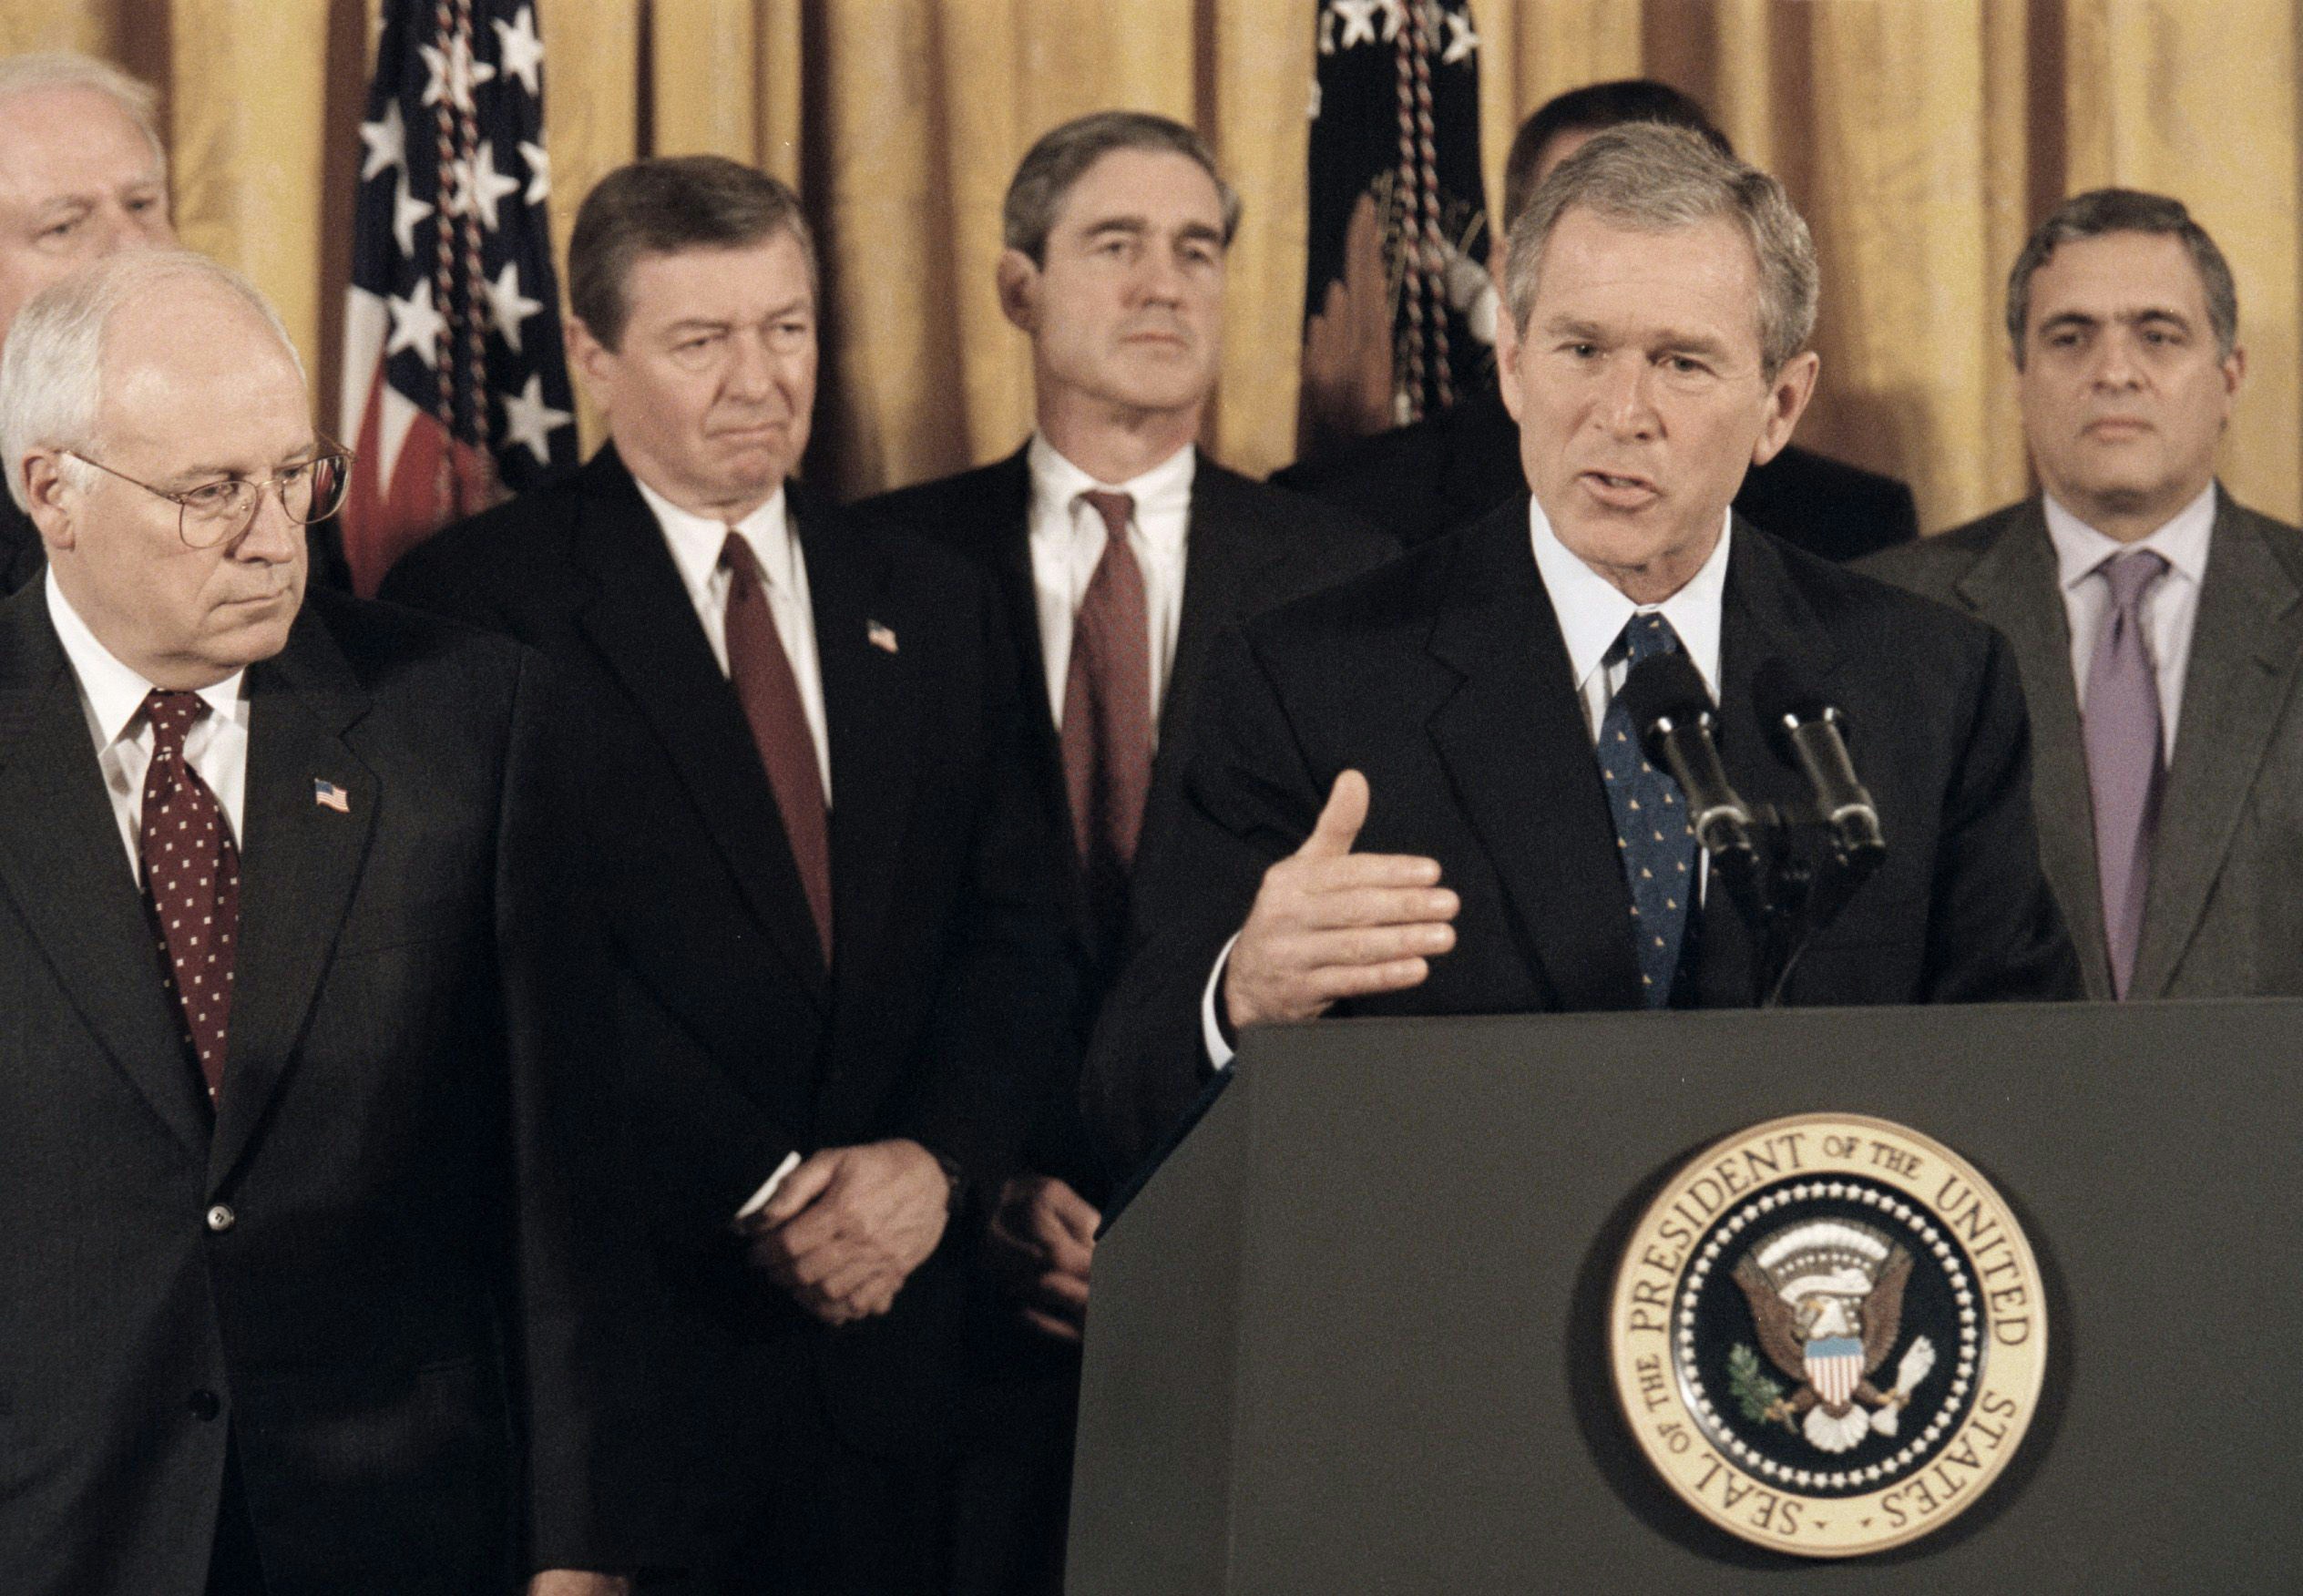 WASHINGTON, DC - OCTOBER 26 - President George Bush delivers speech before signing Patriot Act Anti-Terrorism Bill at the White House. Shown next to Bush,  Vice President Dick Cheney, shown in background (L-R) Rep. James Sensenbrenner, Attorney General John Ashcroft, FBI Director Robert Mueller and CIA Director George Tenet. (Photo by Rich Lipski/The Washington Post via Getty Images)